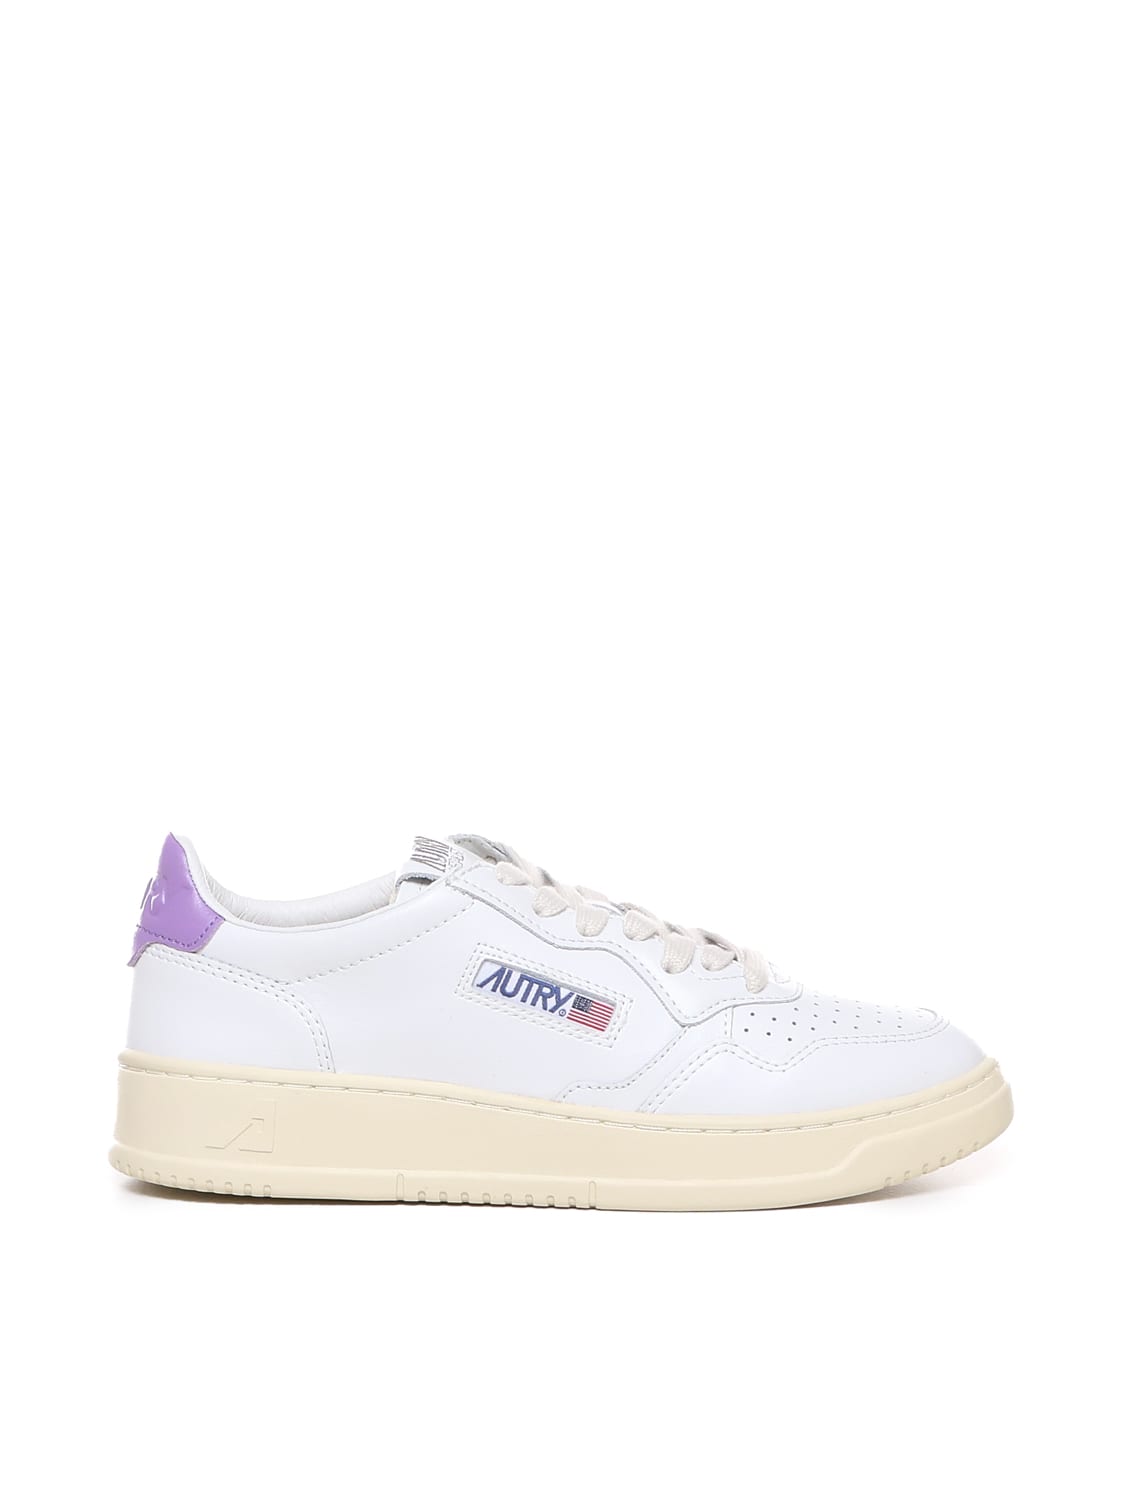 Autry Trainers Medalist Basse In Pelle In White, Lillac